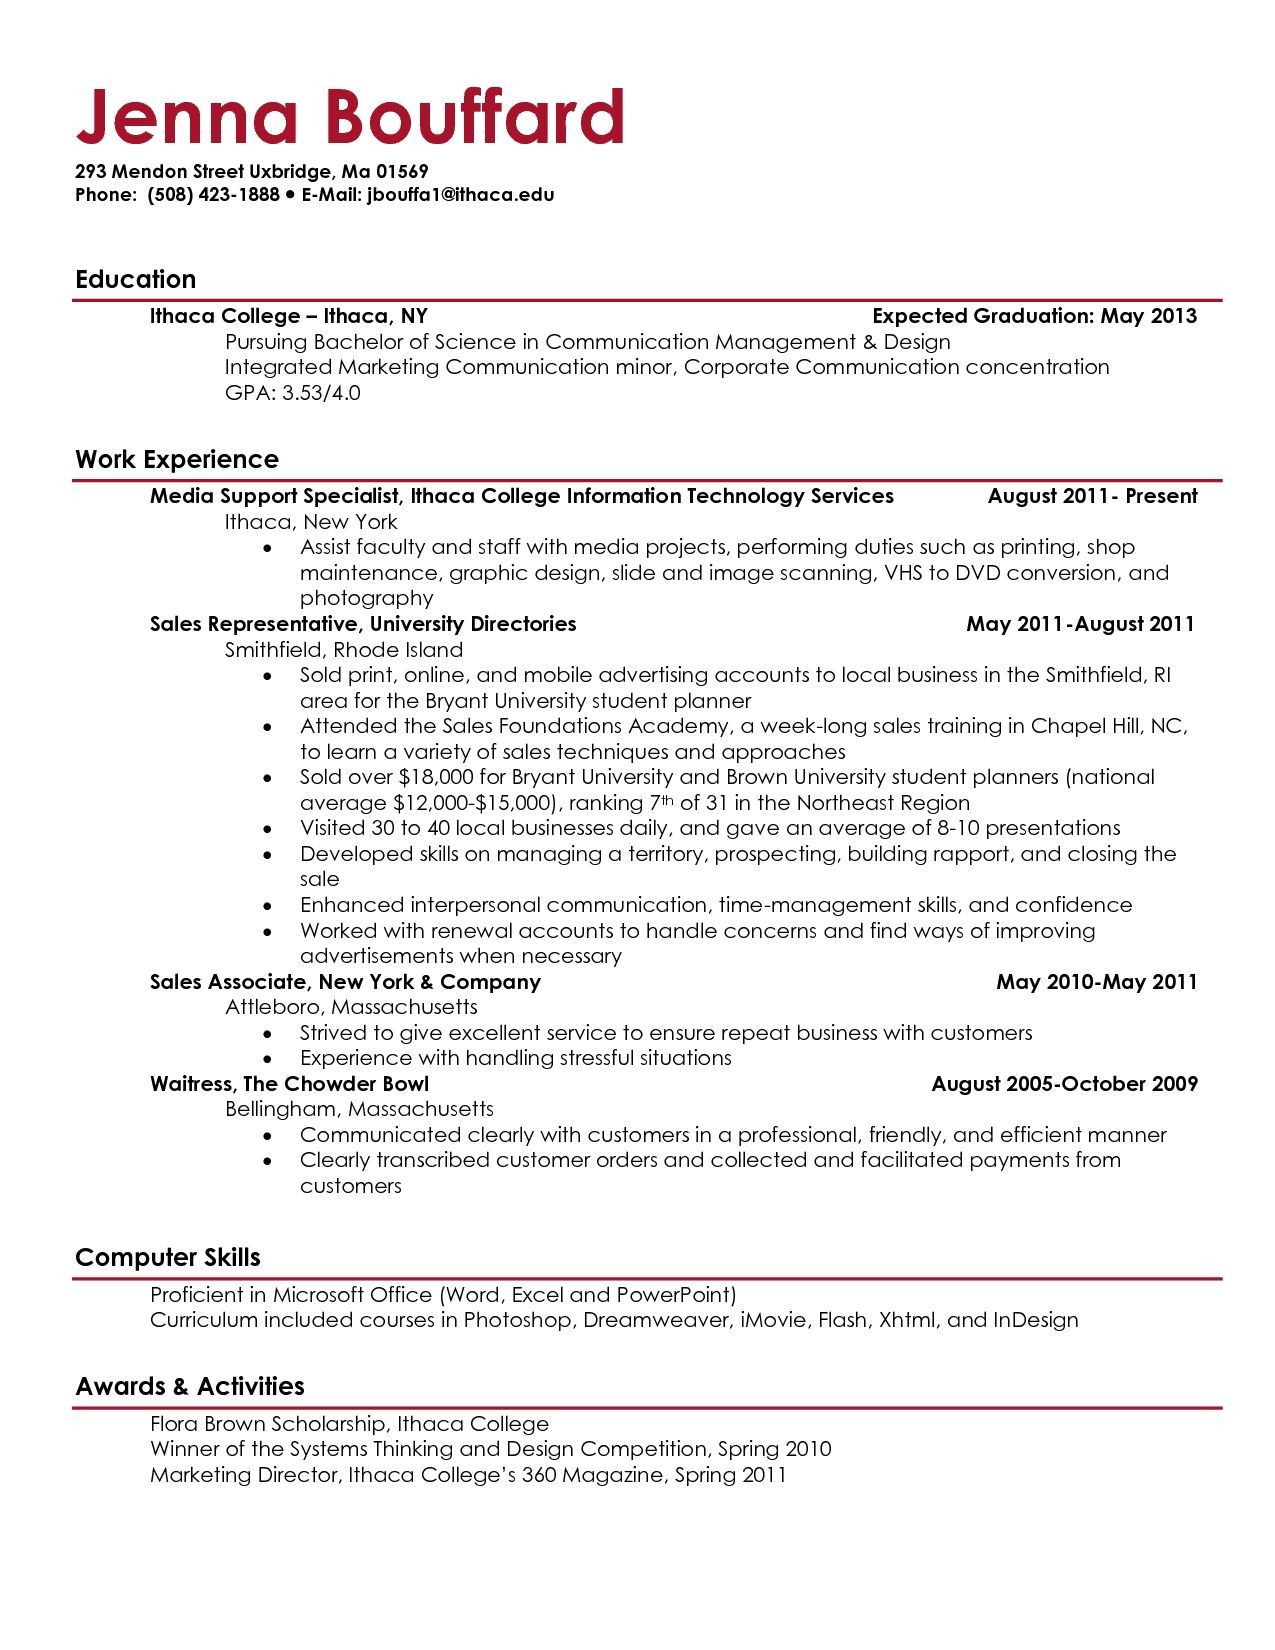 Resume Sample for A College Student Resume Templates for College Students , #college #resume …